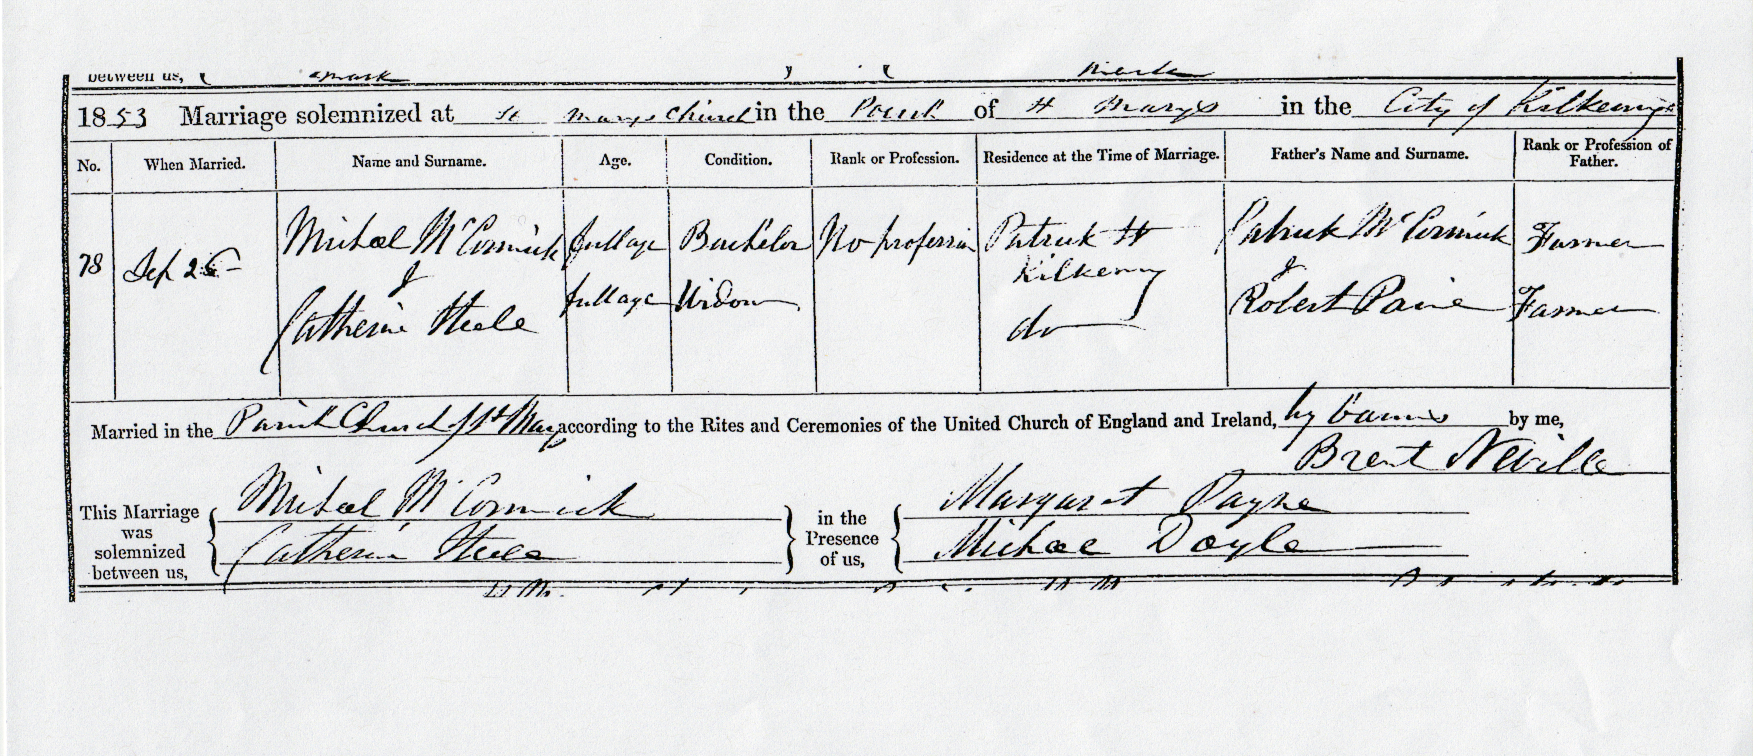 Marriage Certificate 1 - Michael & Catherine